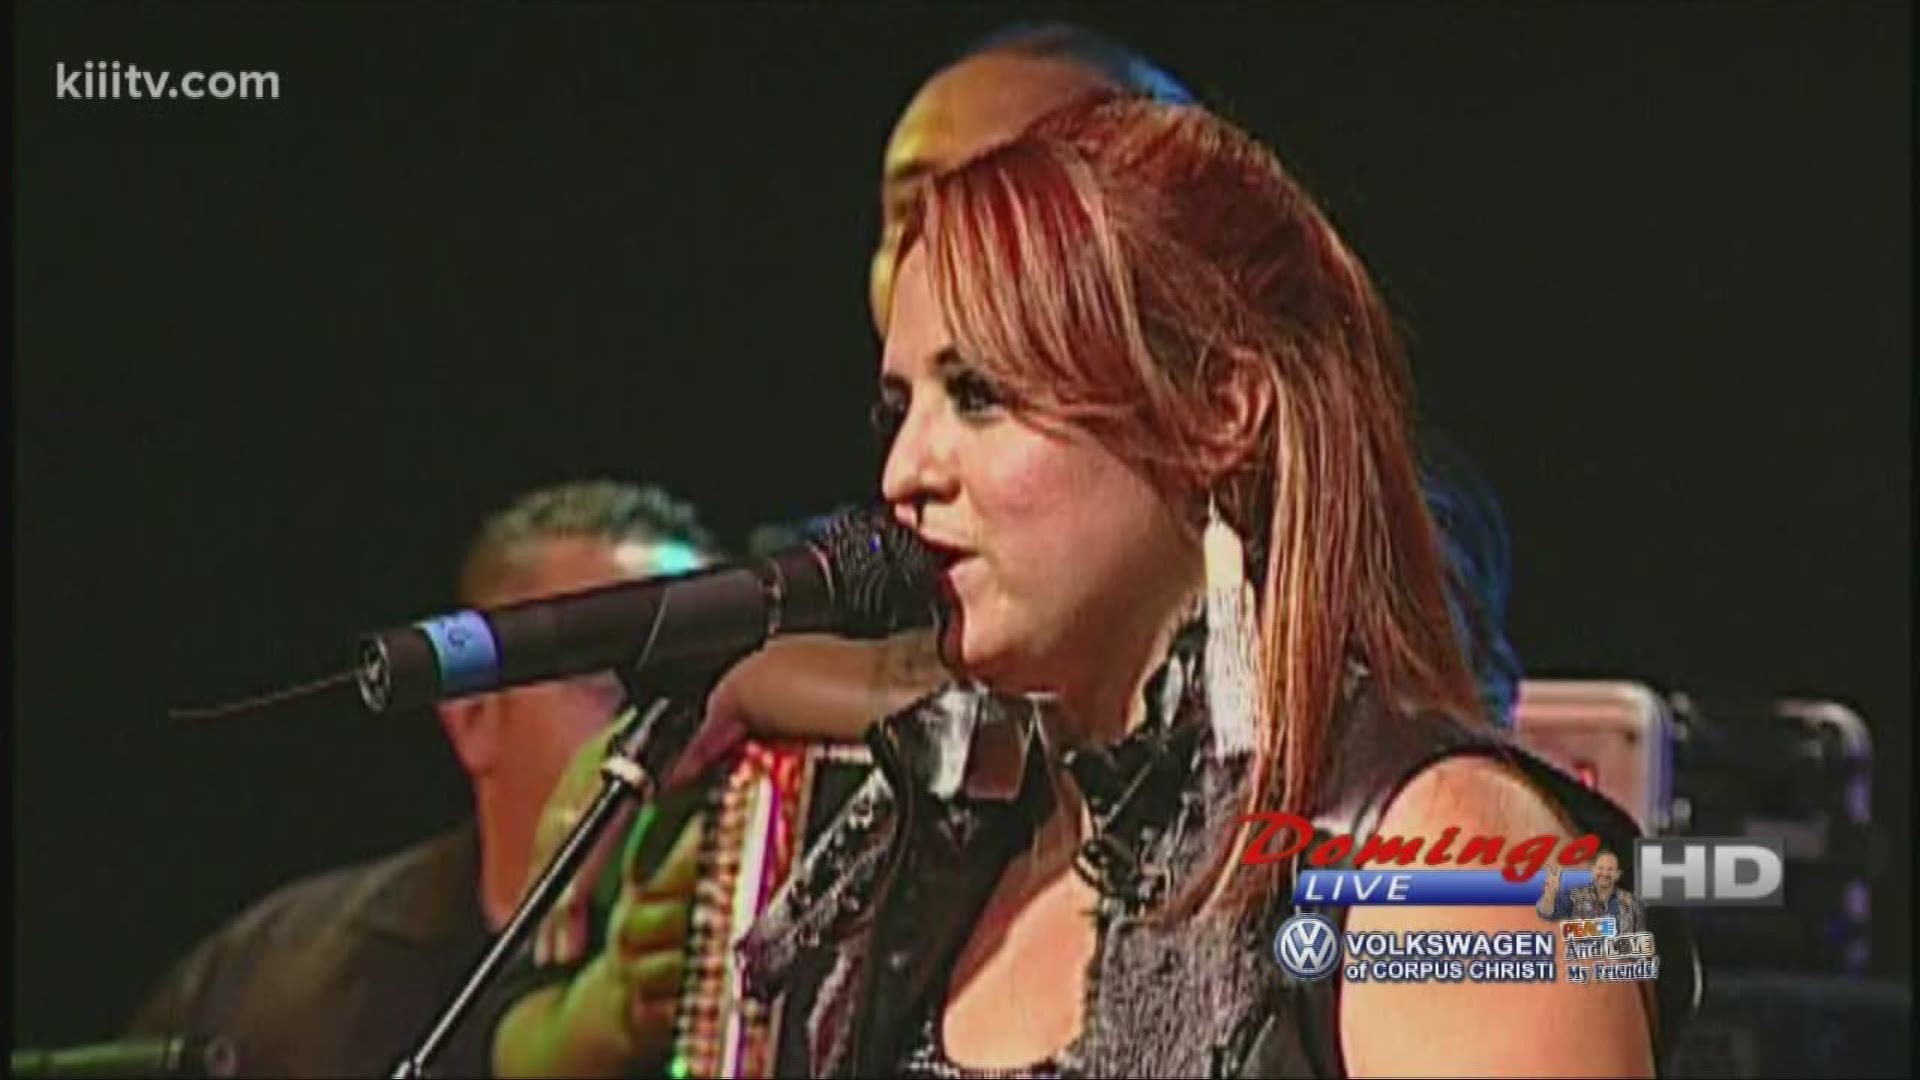 Shelly Lares "Ganas De Besarte" performance courtesy of Q-Productions, on Domingo Live.